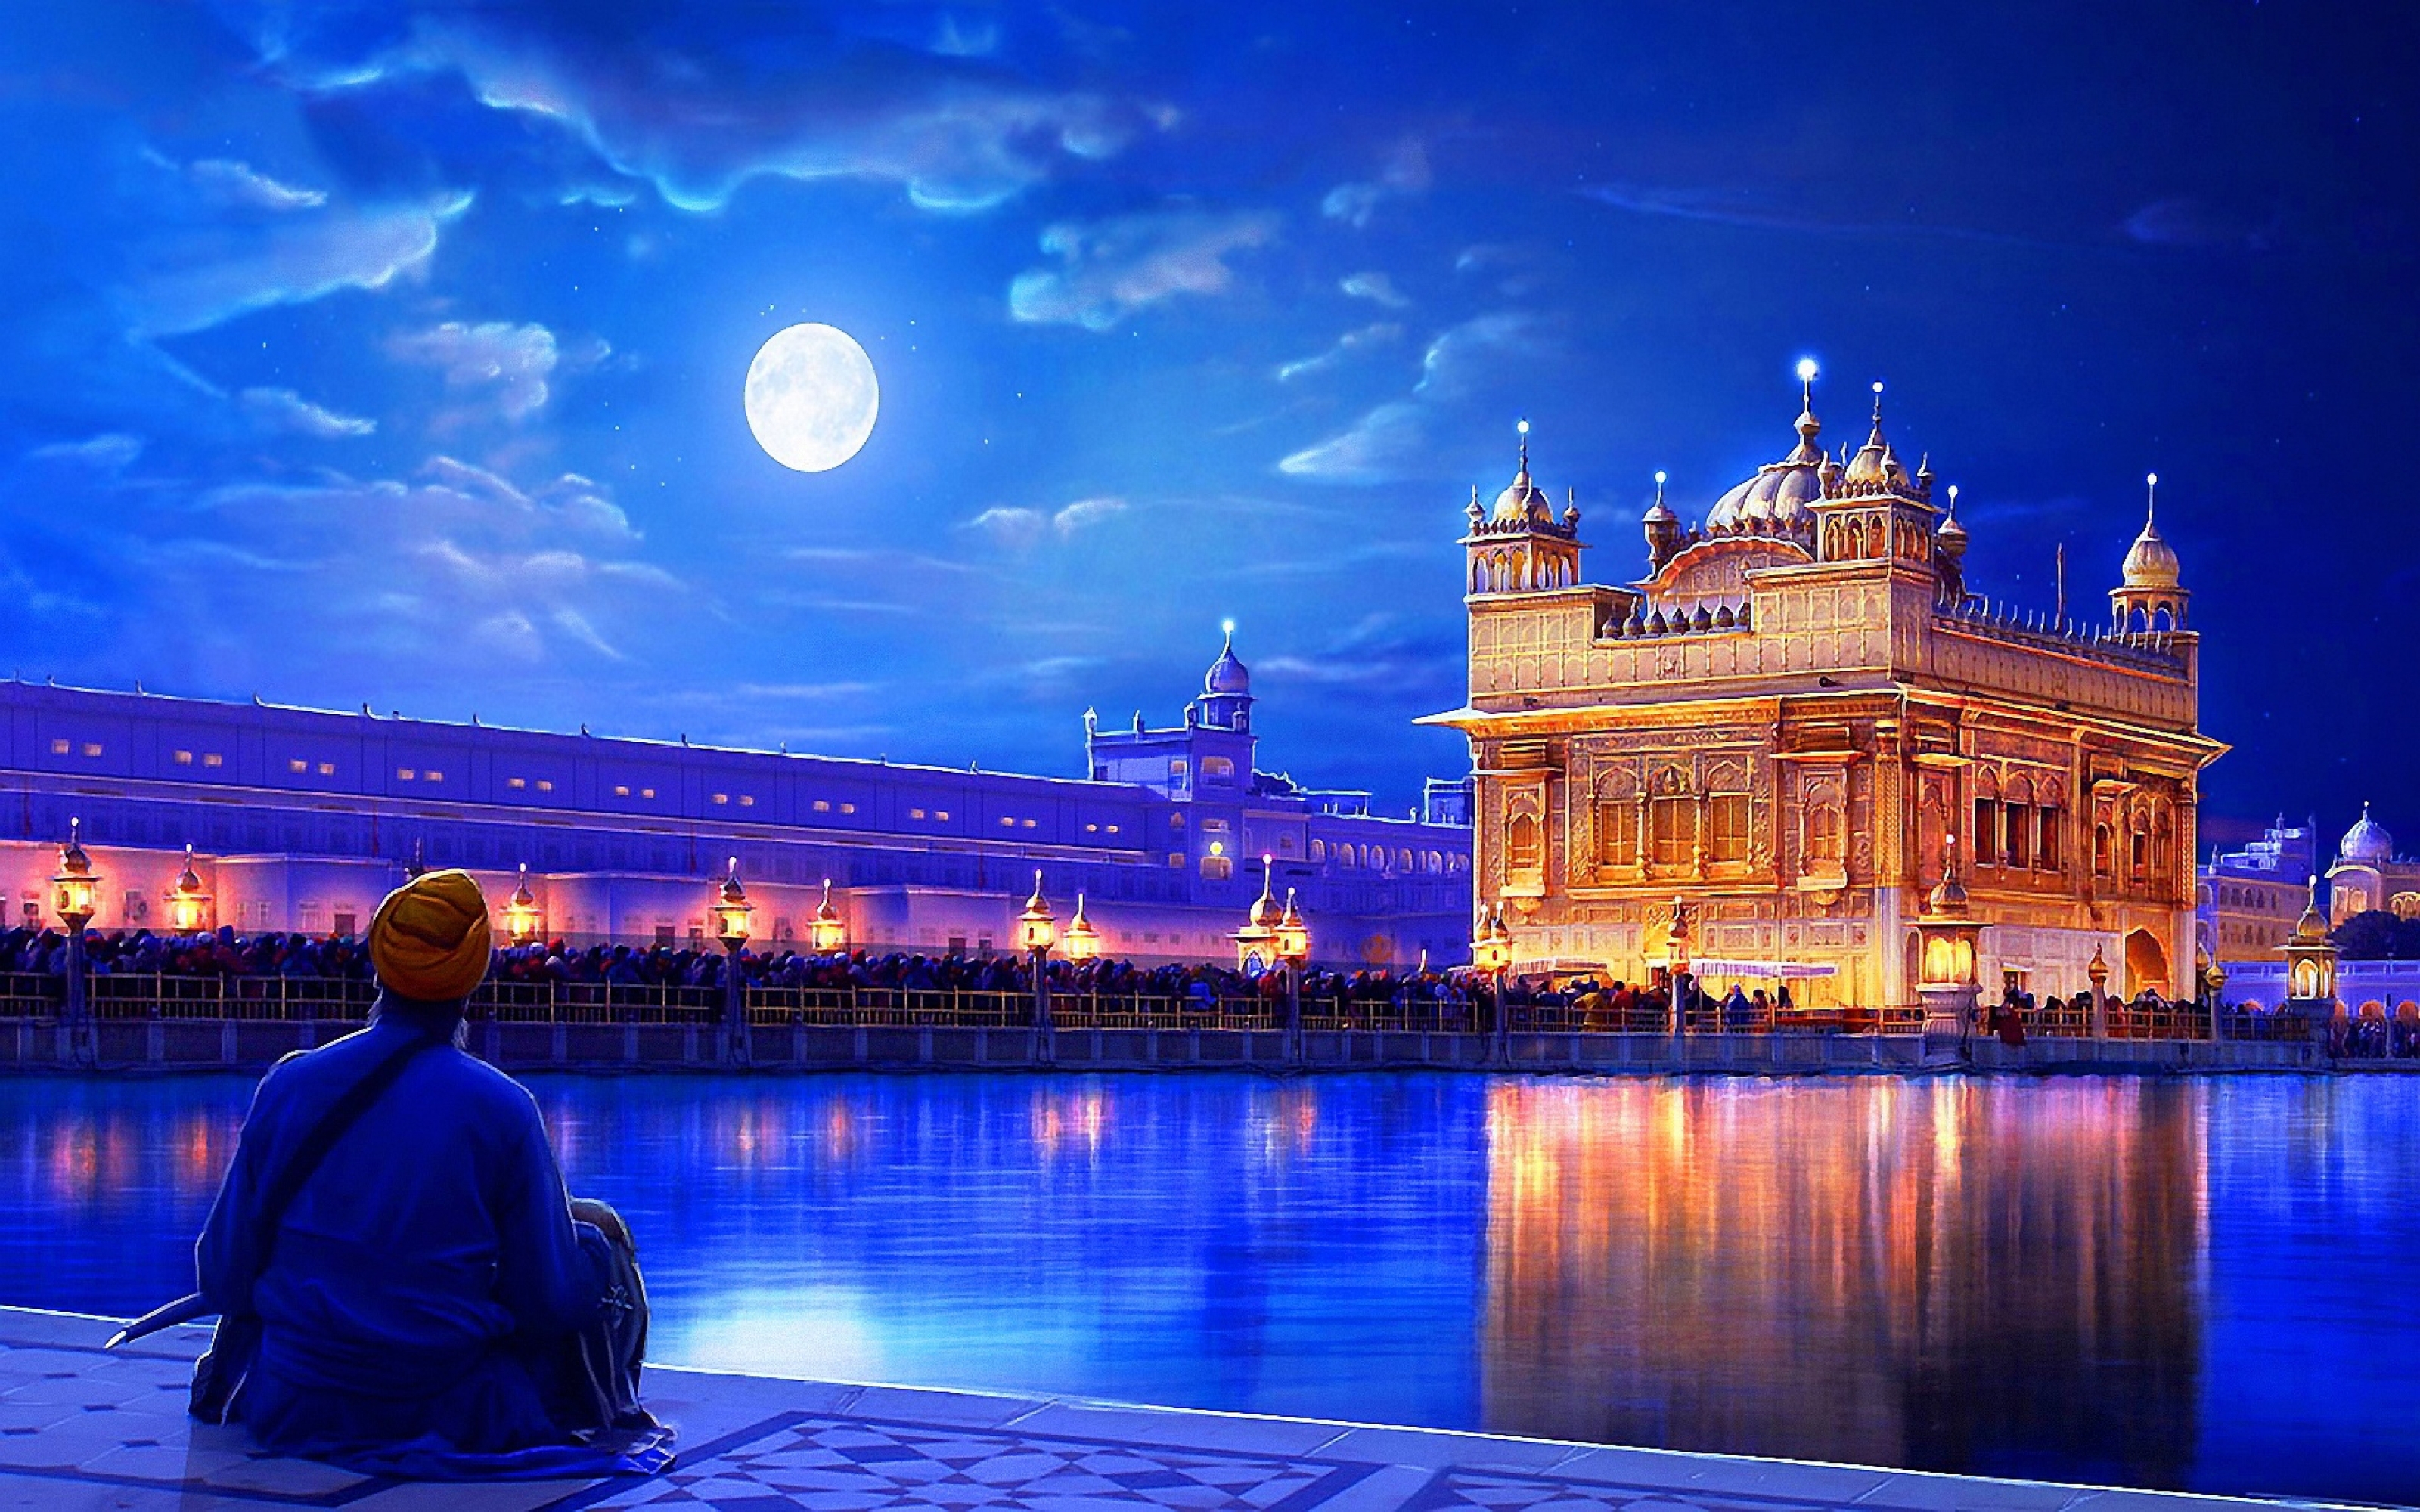 Golden Temple Amritsar India for 3200 x 2000 Wide Retina Display resolution